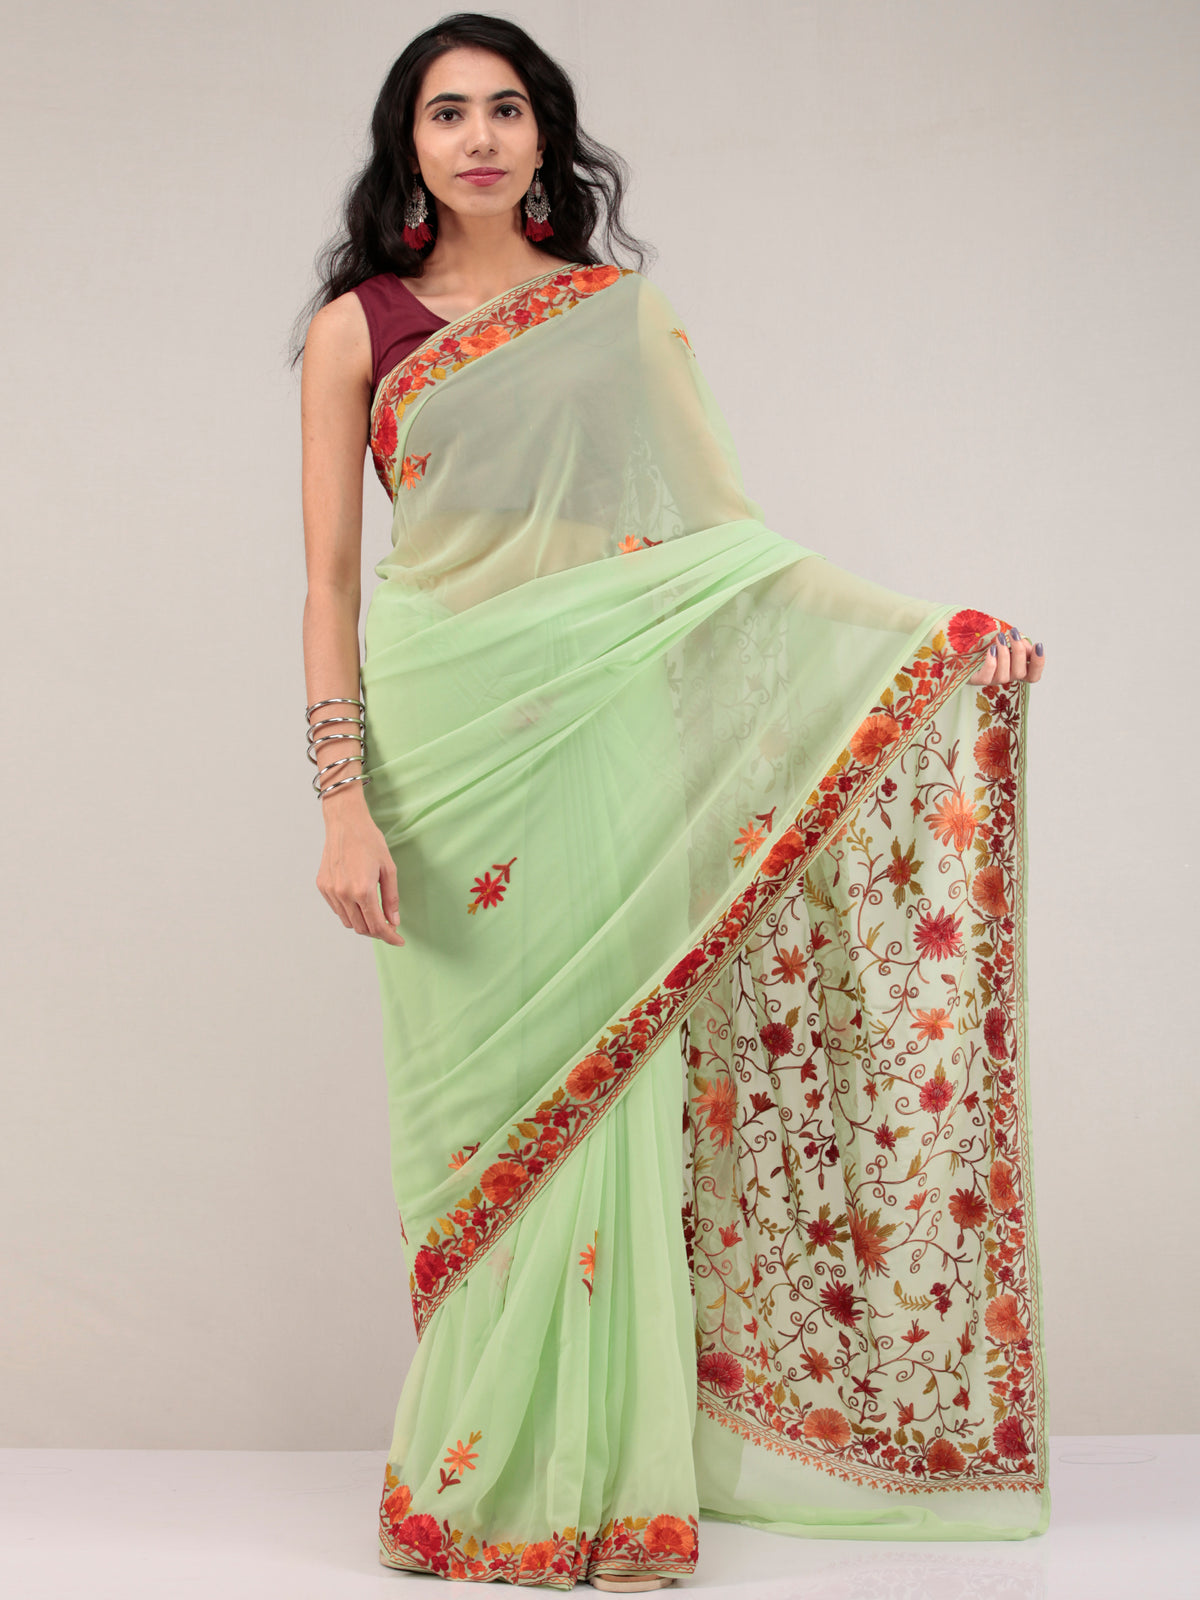 Light Green Aari Embroidered Georgette Saree From Kashmir - S031704630